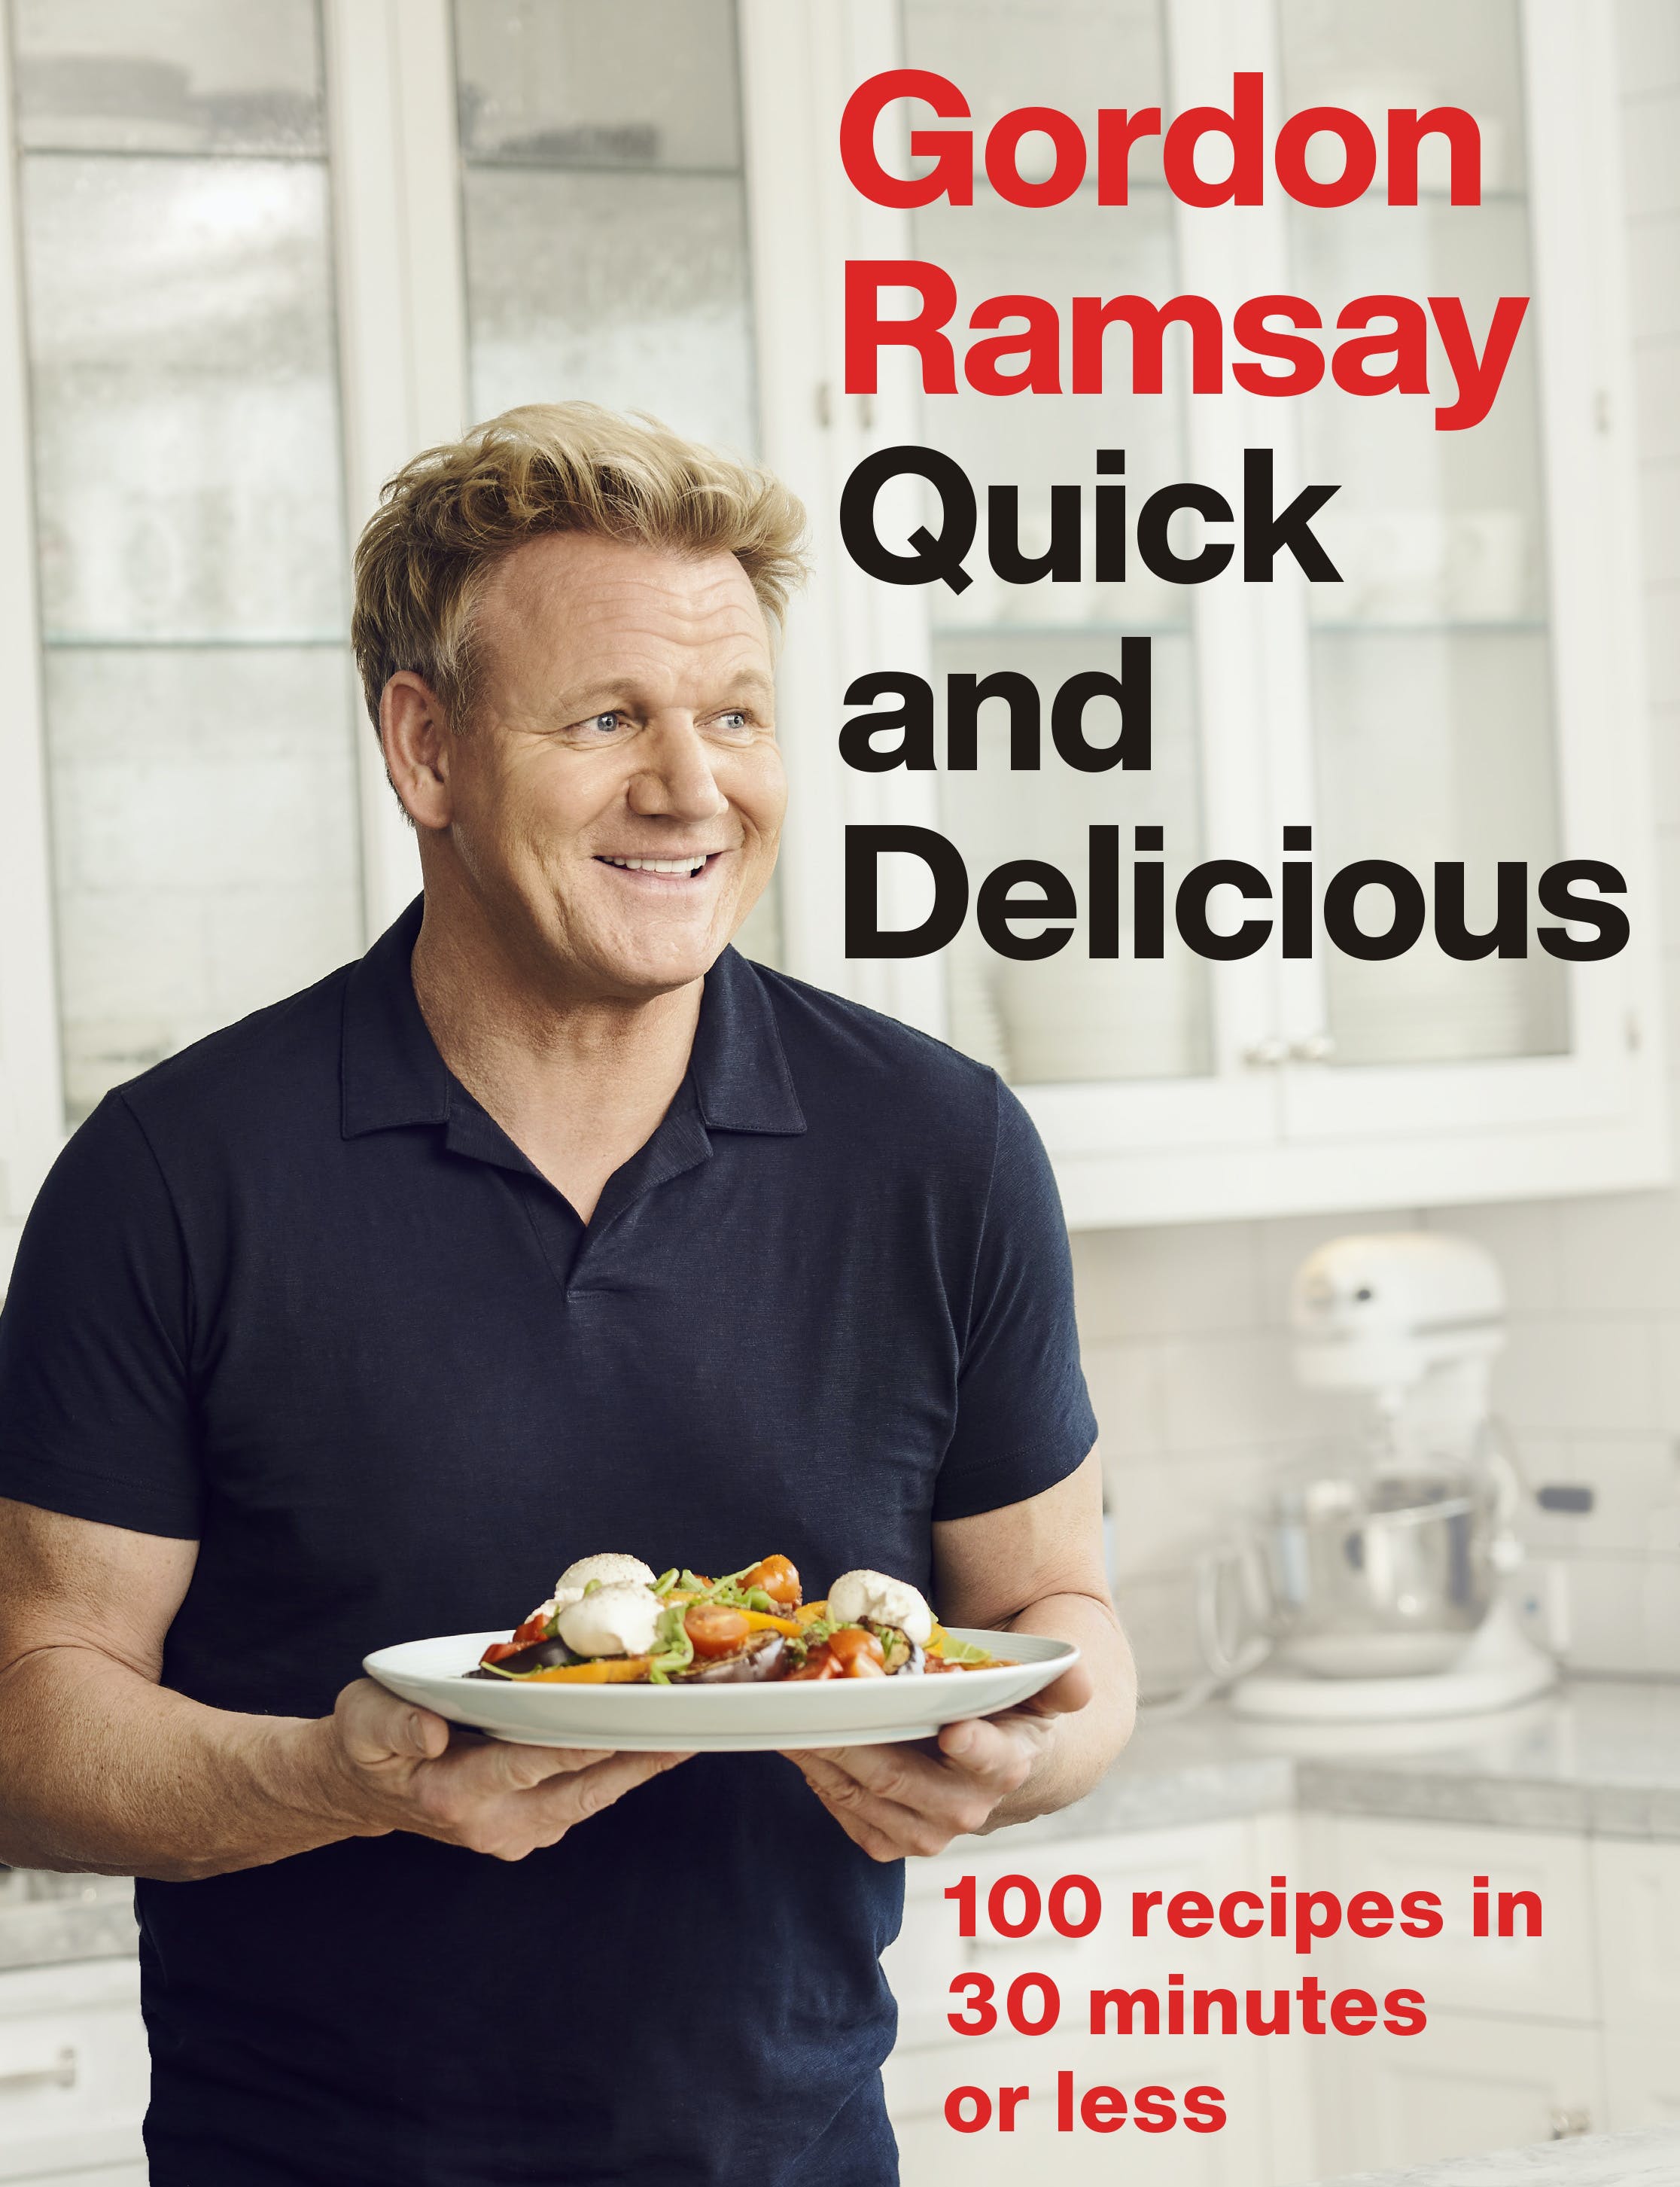 Gordon ramsay ultimate cookery course recipes pdf download